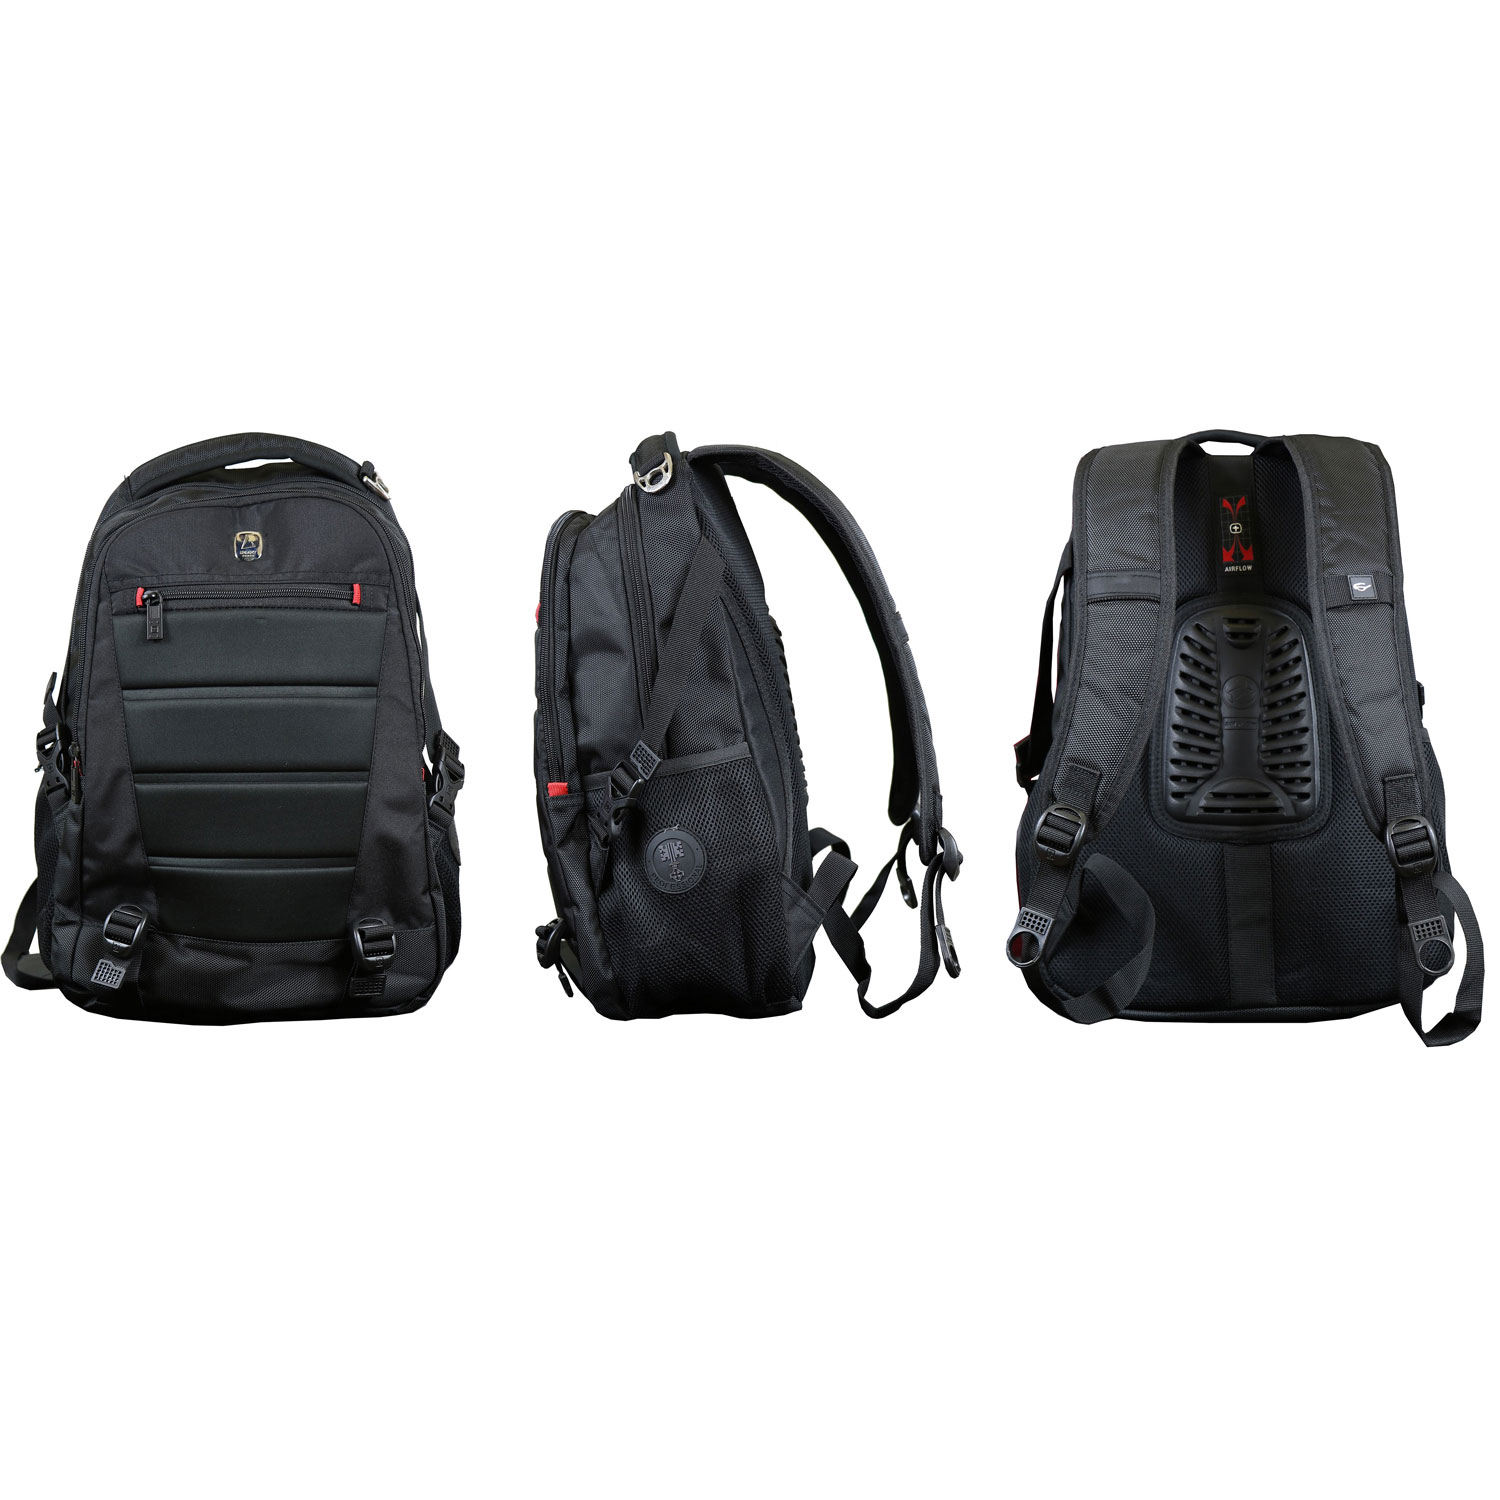 Multi-compartment Travel Backpack